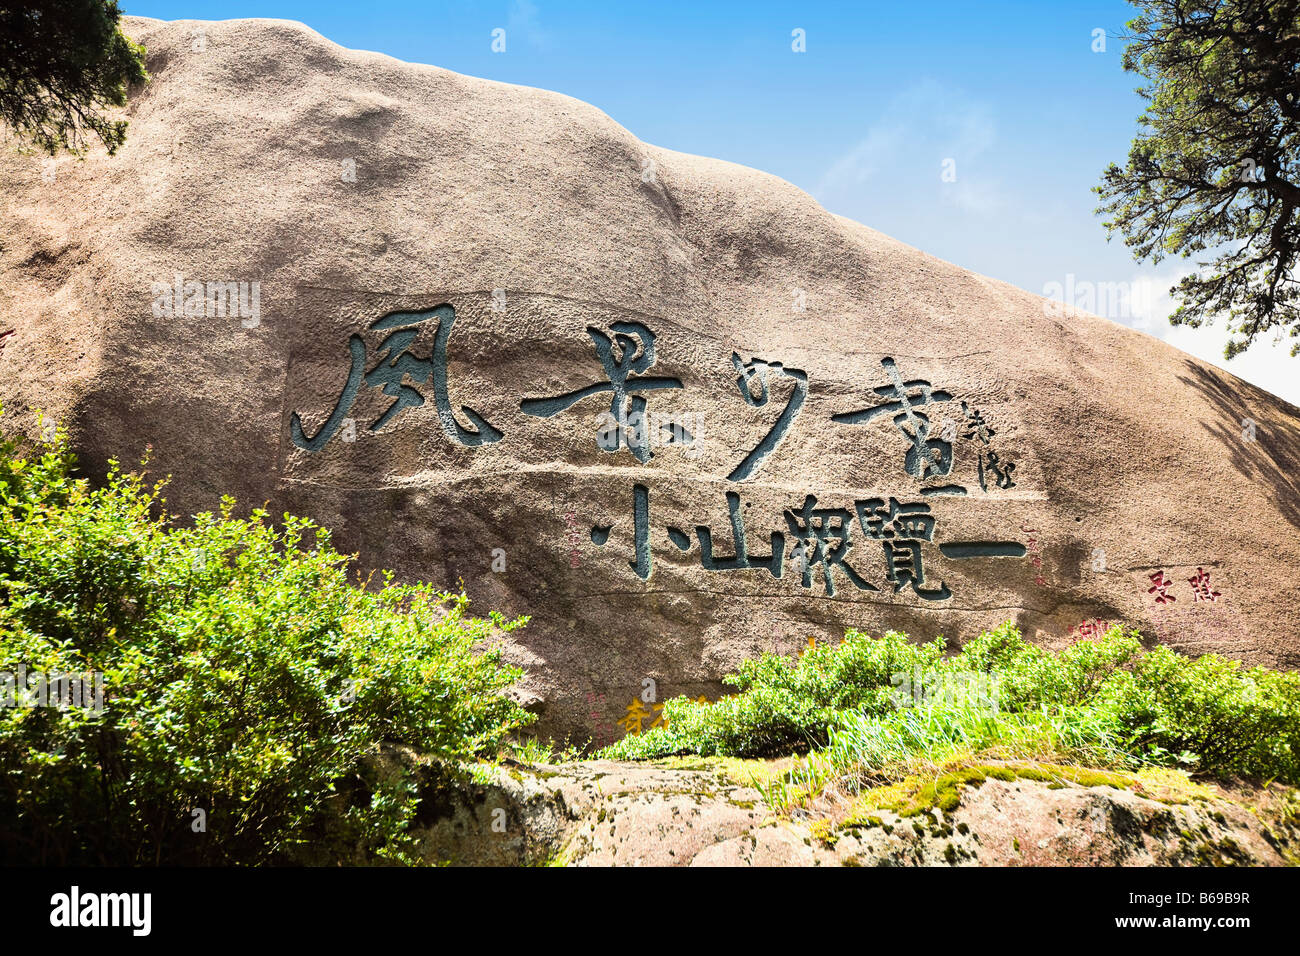 Low angle view of Chinese script sur une formation rocheuse, Huangshan, Anhui Province, China Banque D'Images